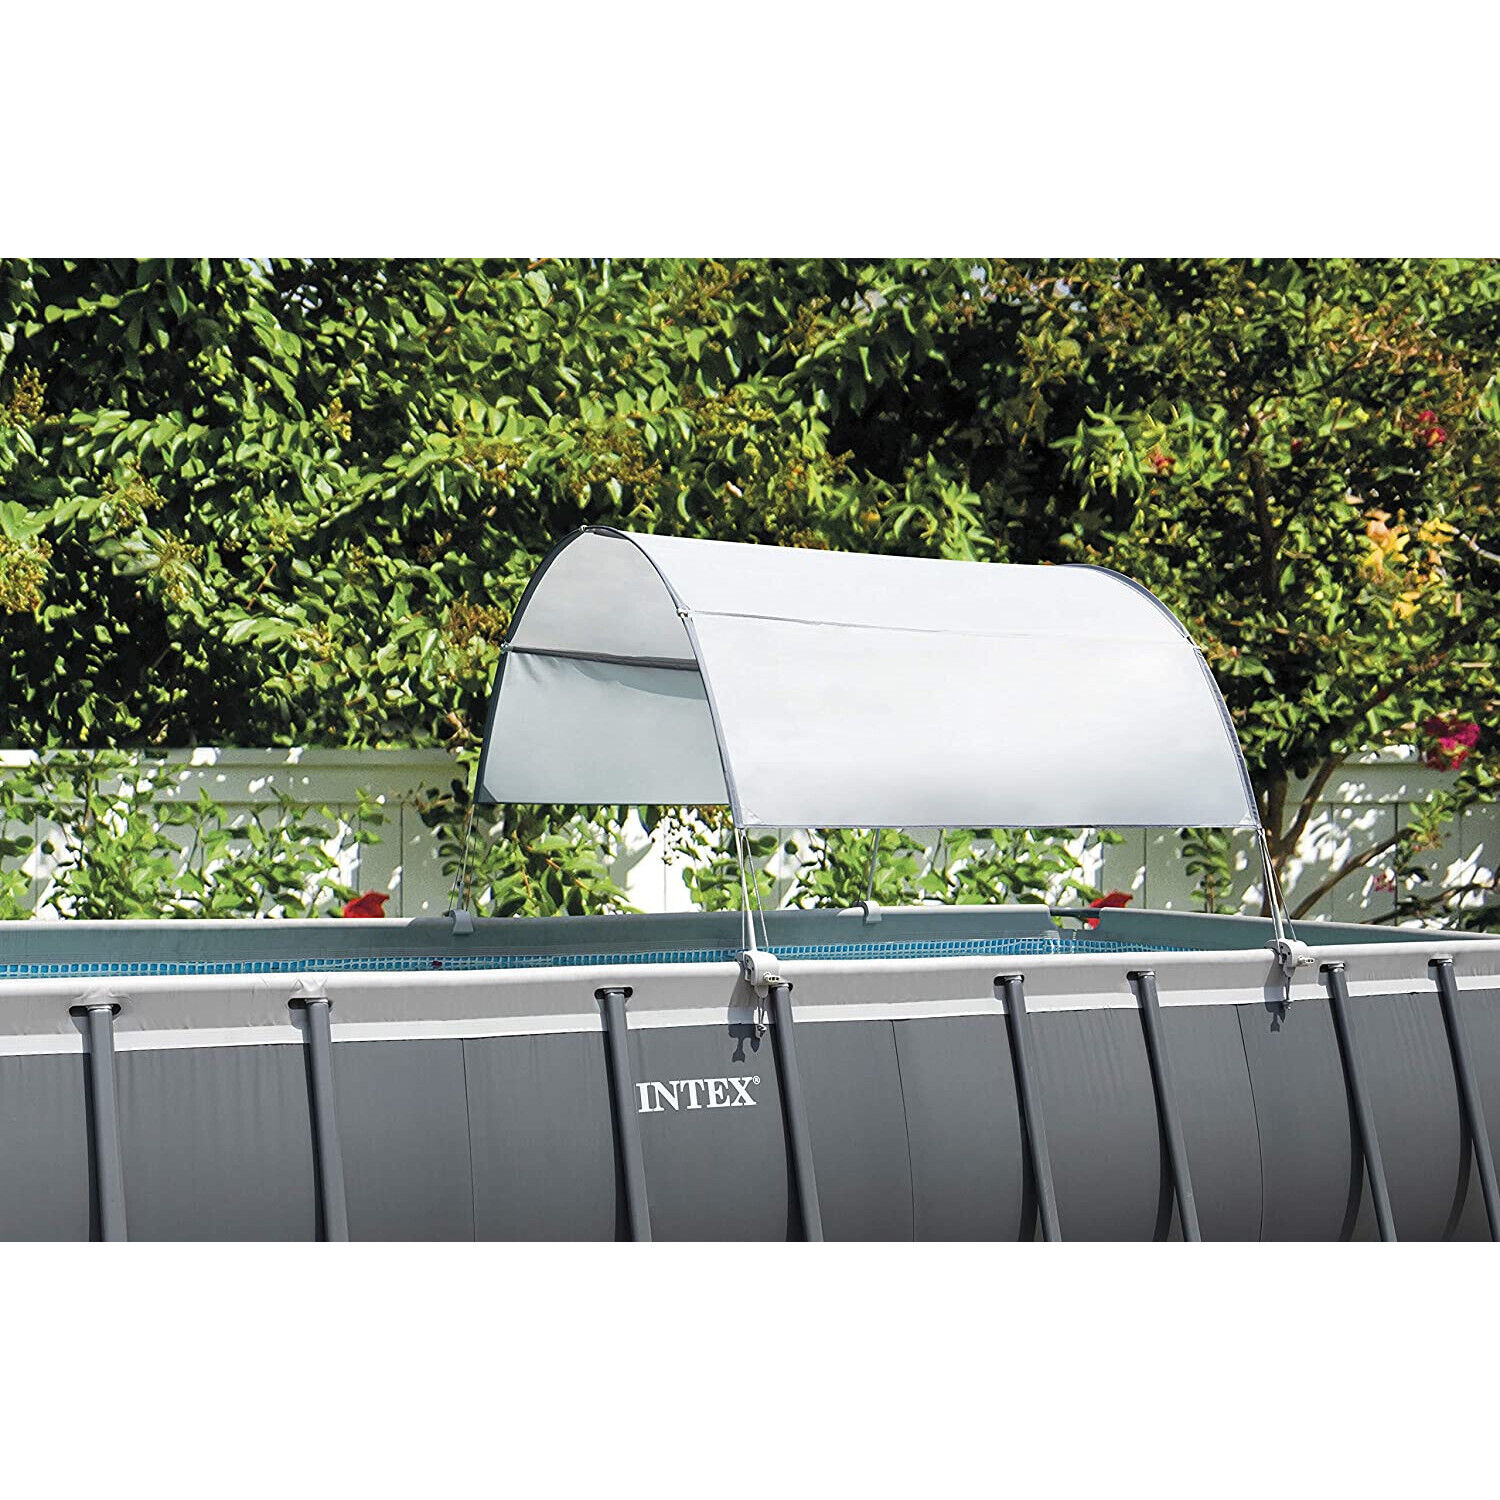 Intex 28054 - Pool Sunroof - For Steel Pipe Basin (to 288 3/16in) Sun Protection